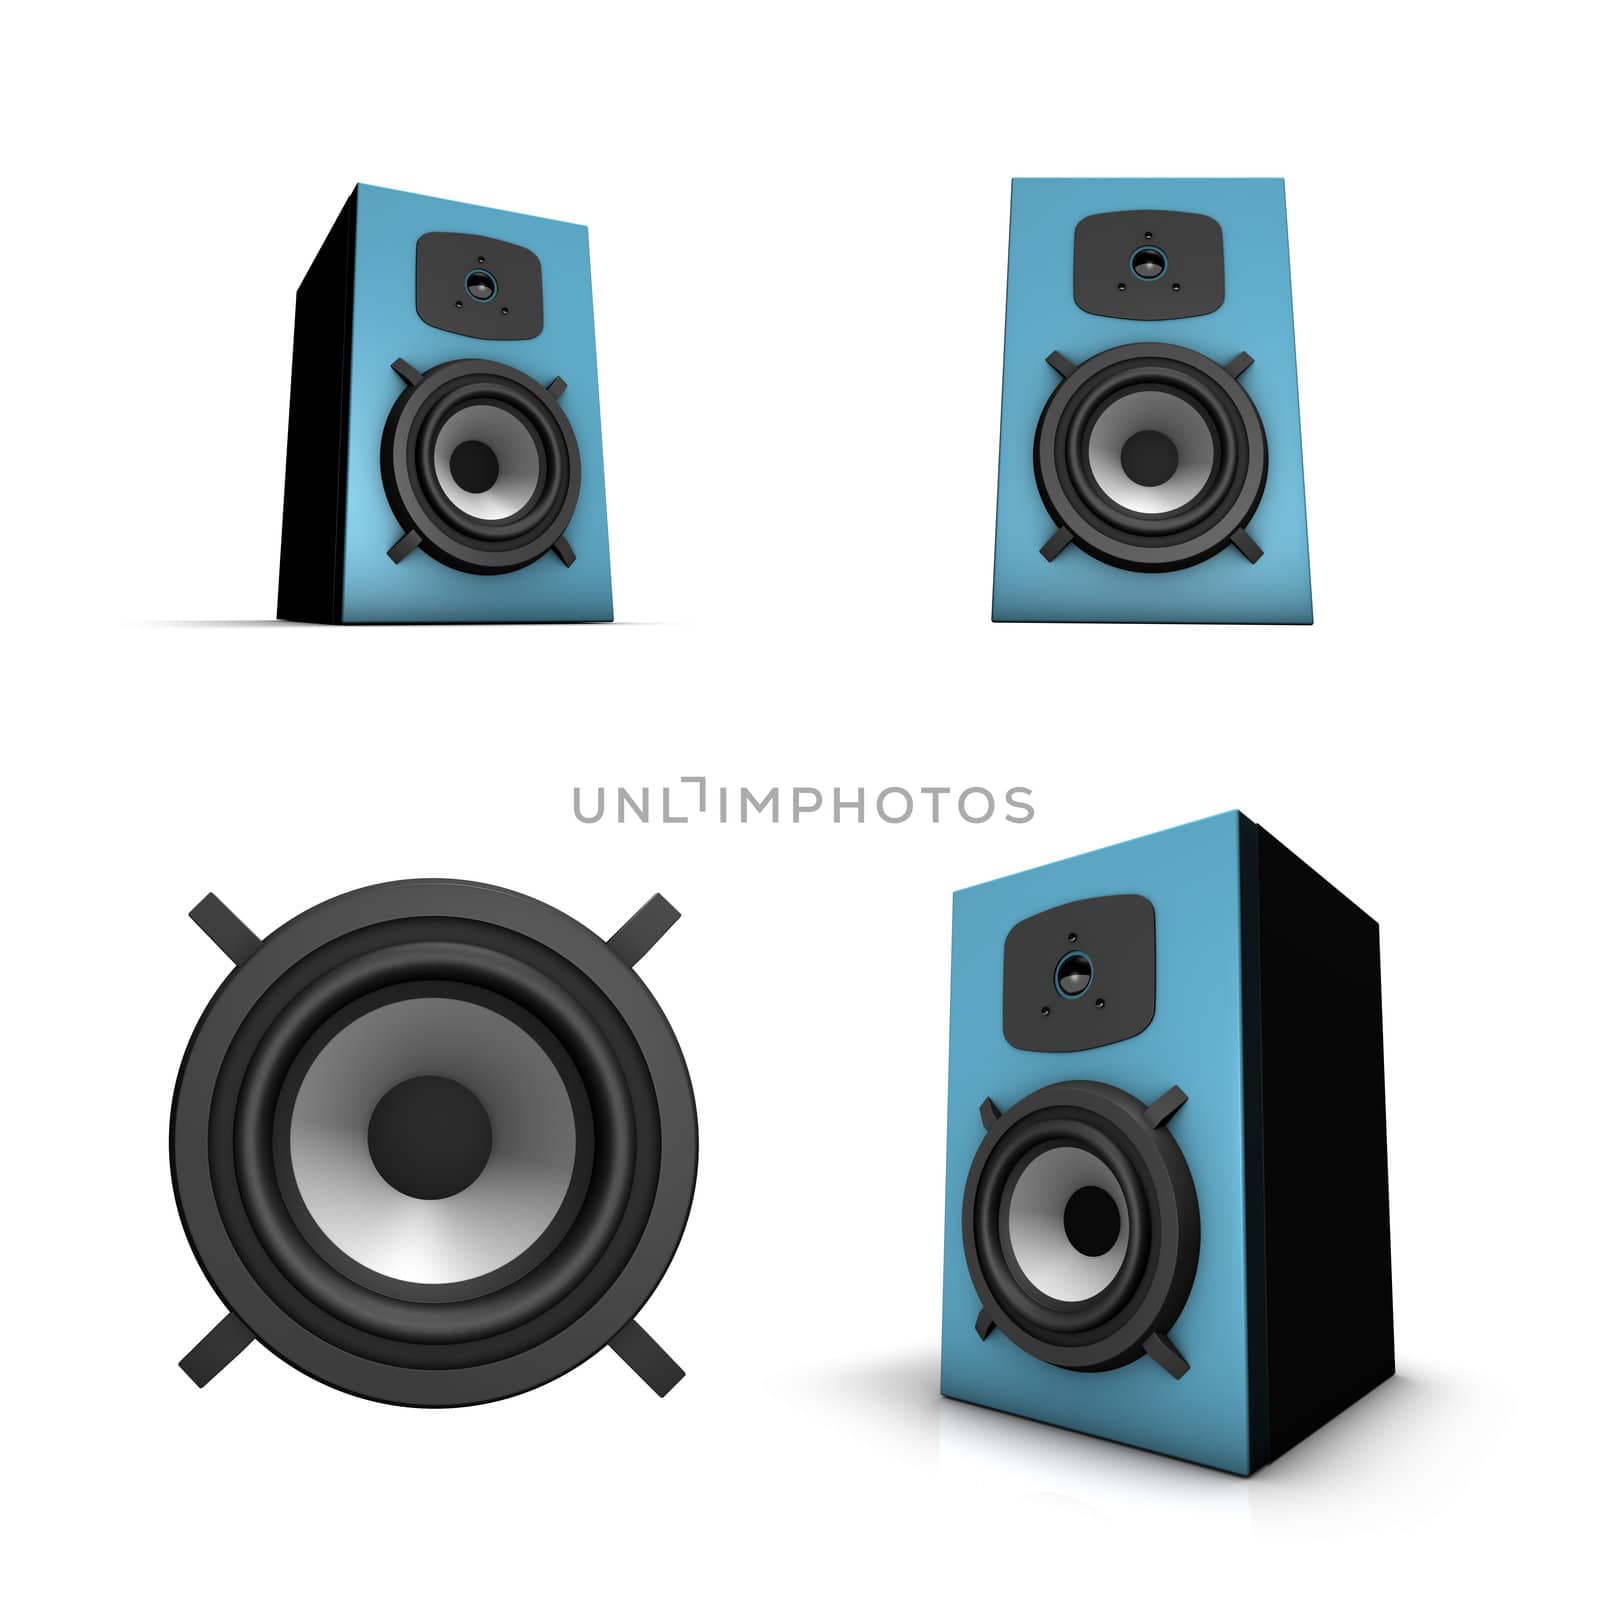 Rendering of an isolated speaker in different perspective